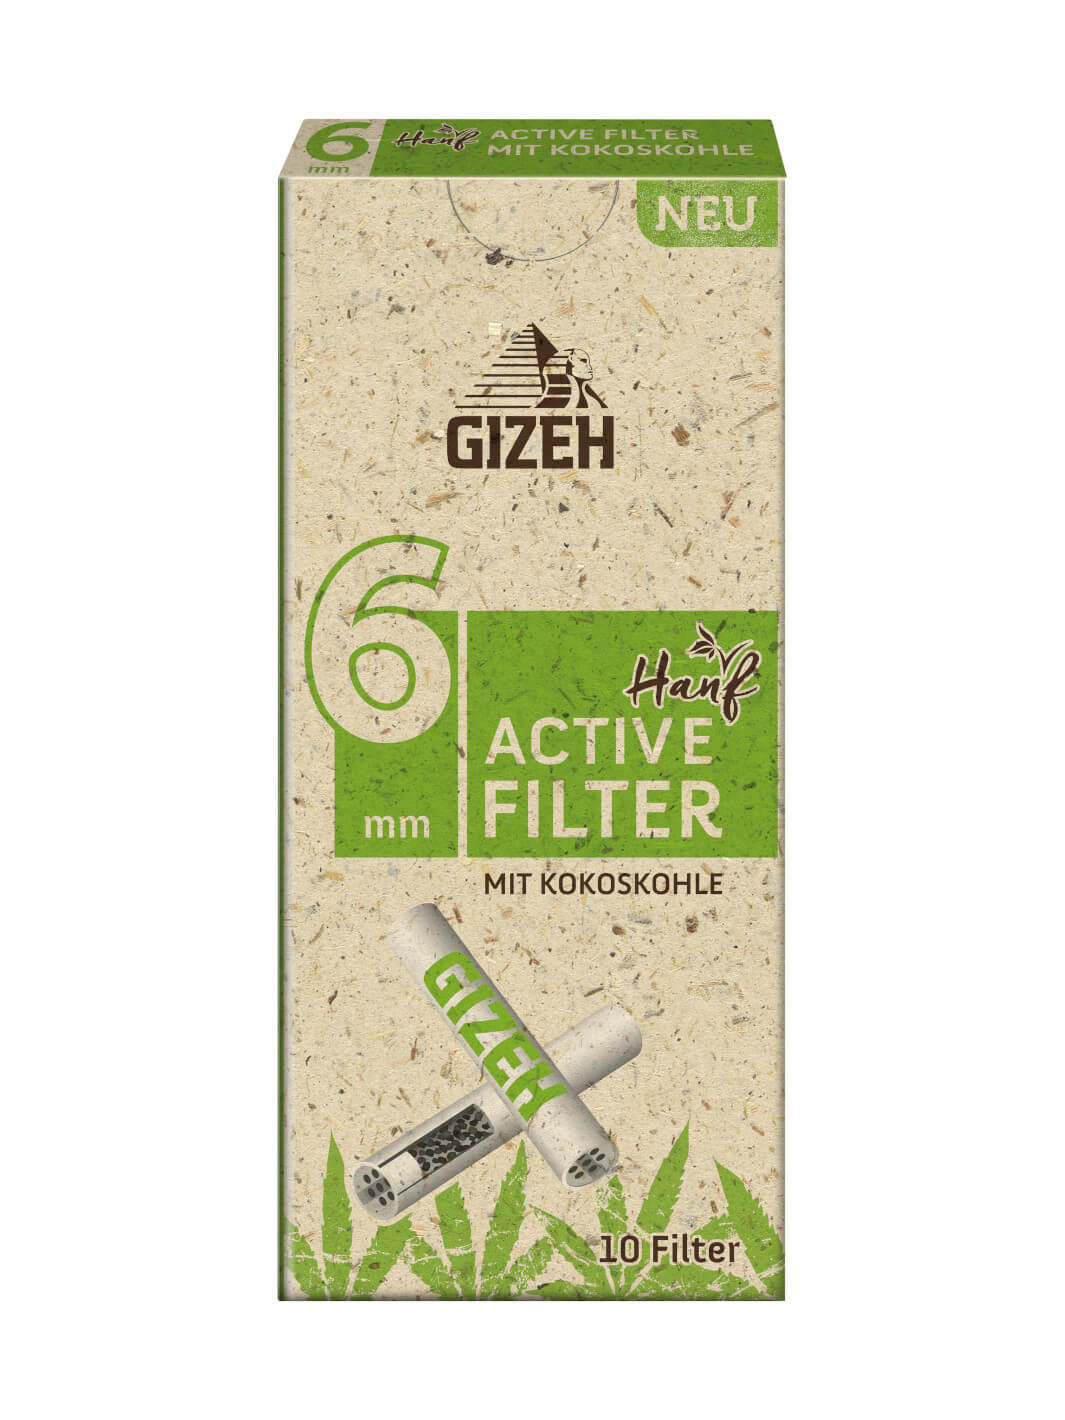 Gizeh hanf active filter